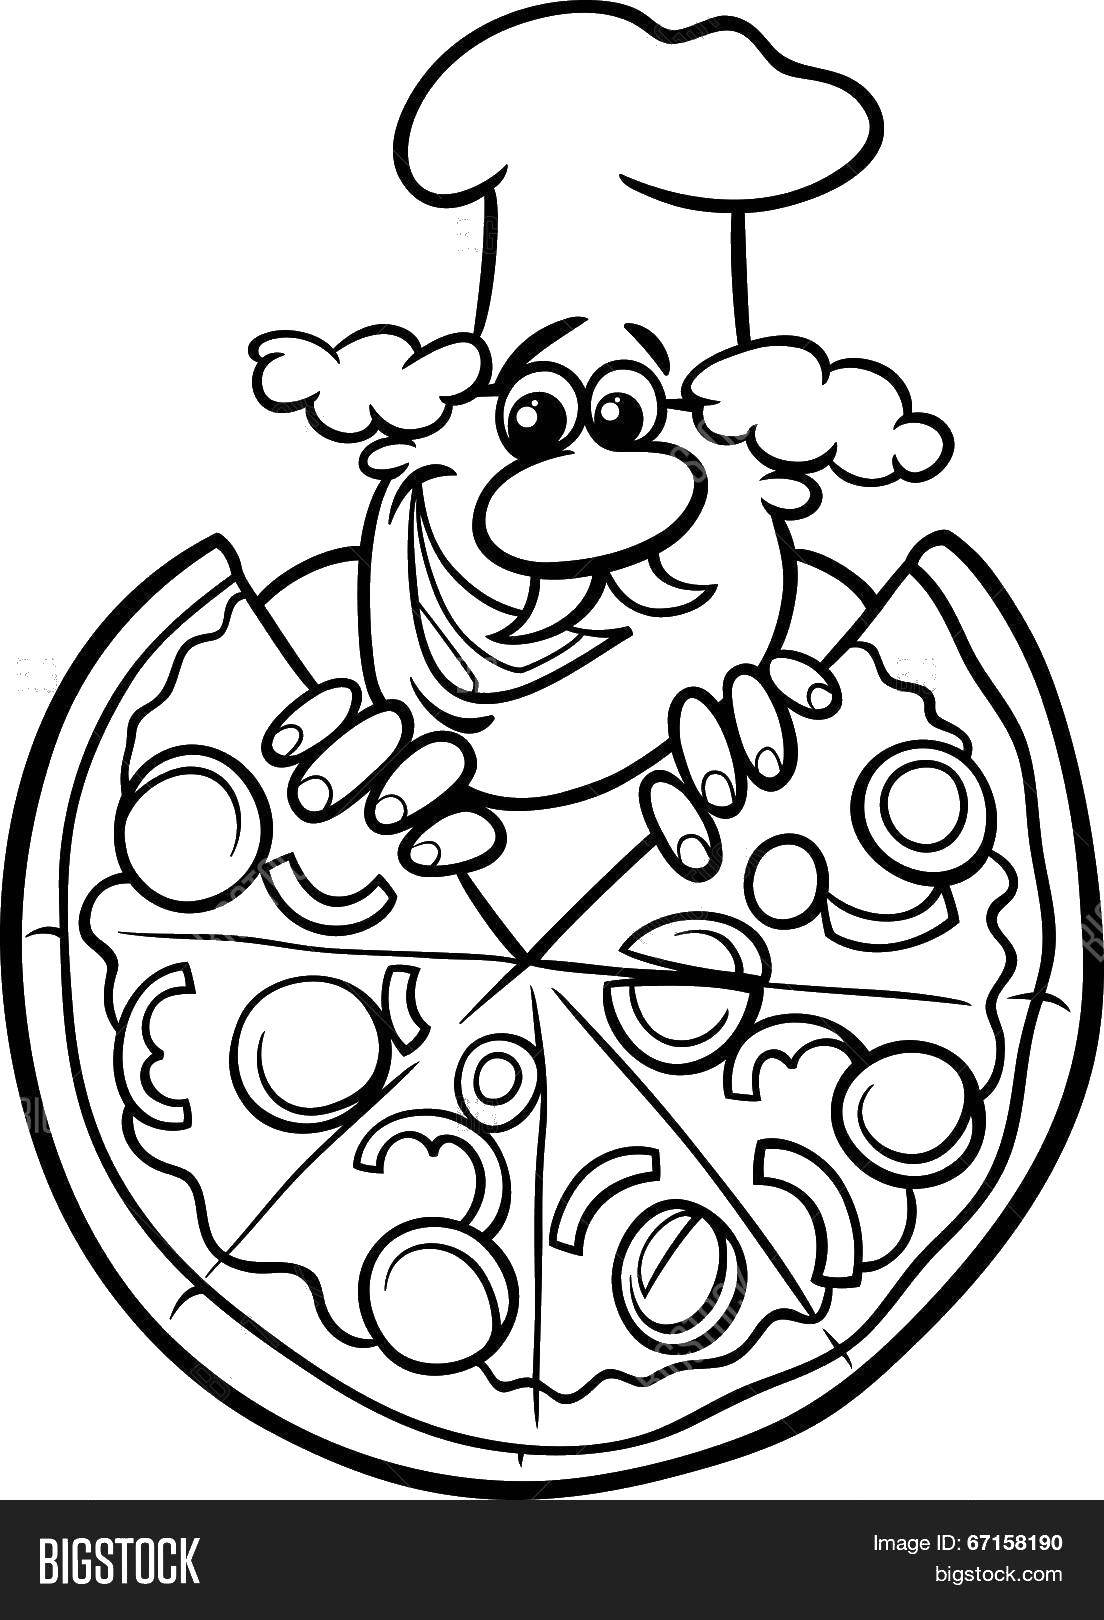 Coloring Chef and pizza. Category the food. Tags:  chef, pizza, dome.